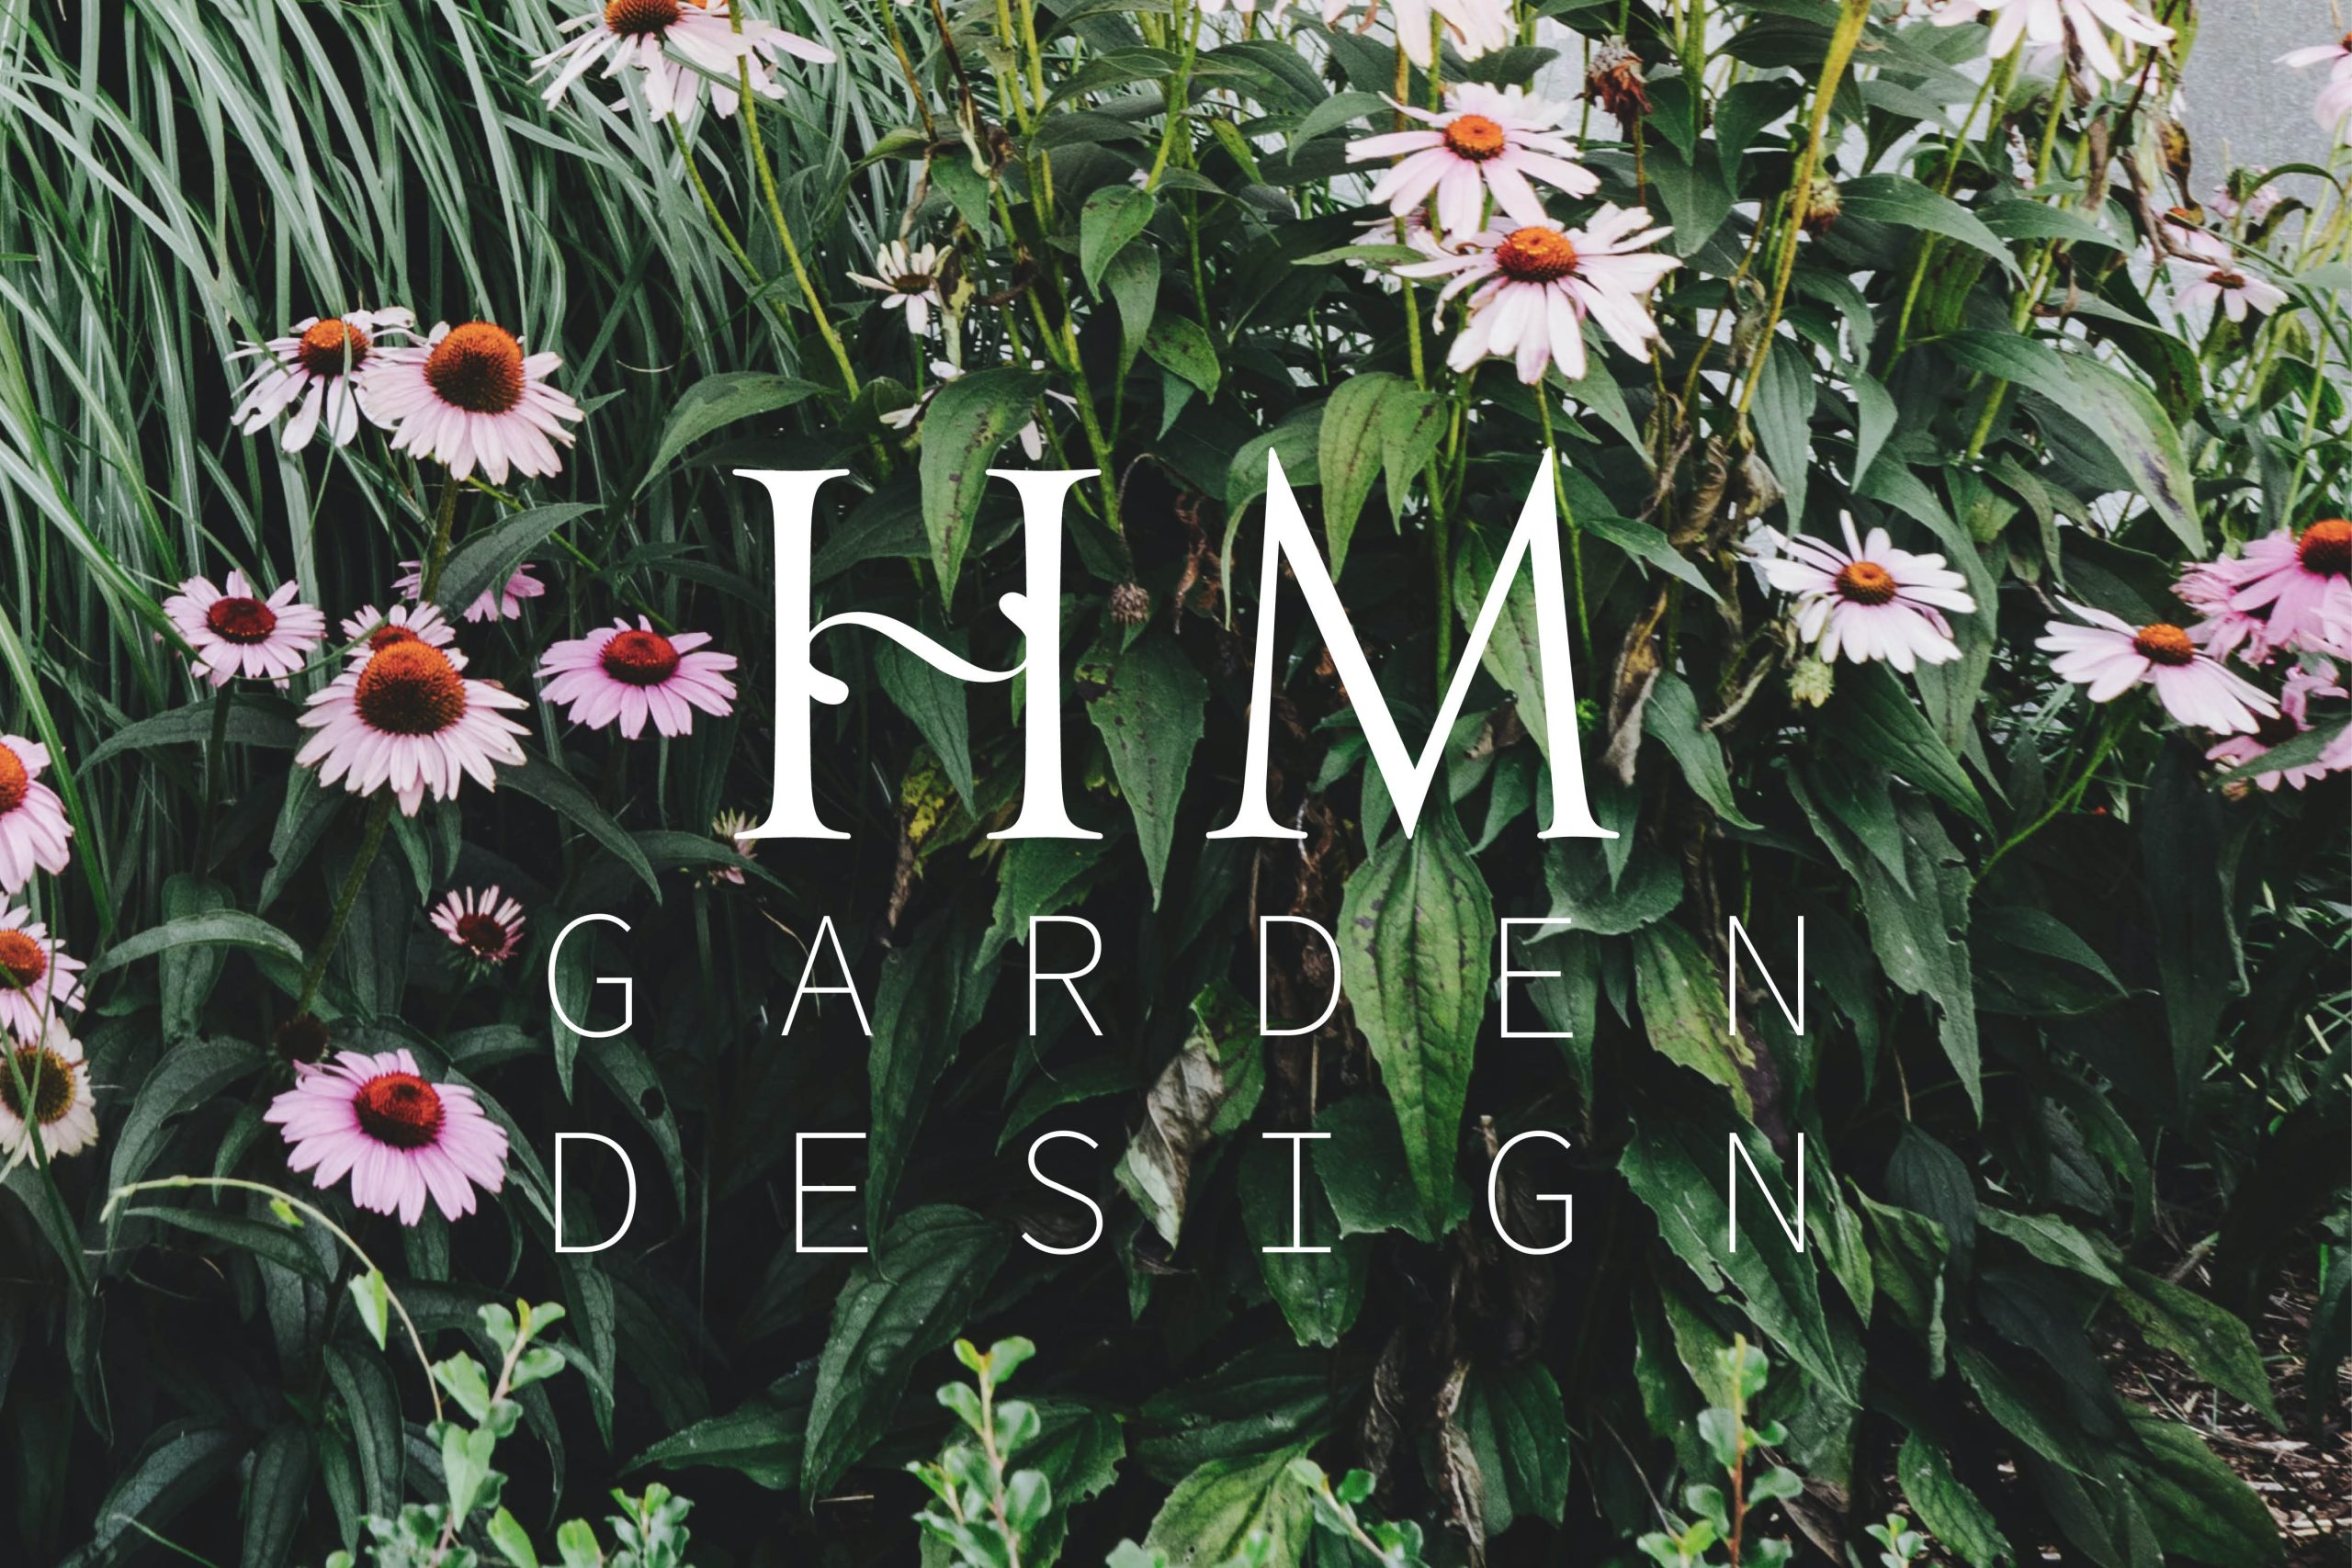 luscious garden with green leaves, tall grass and pink daisy like flowers with Logo over the top which says "HM Garden Design" in white text.